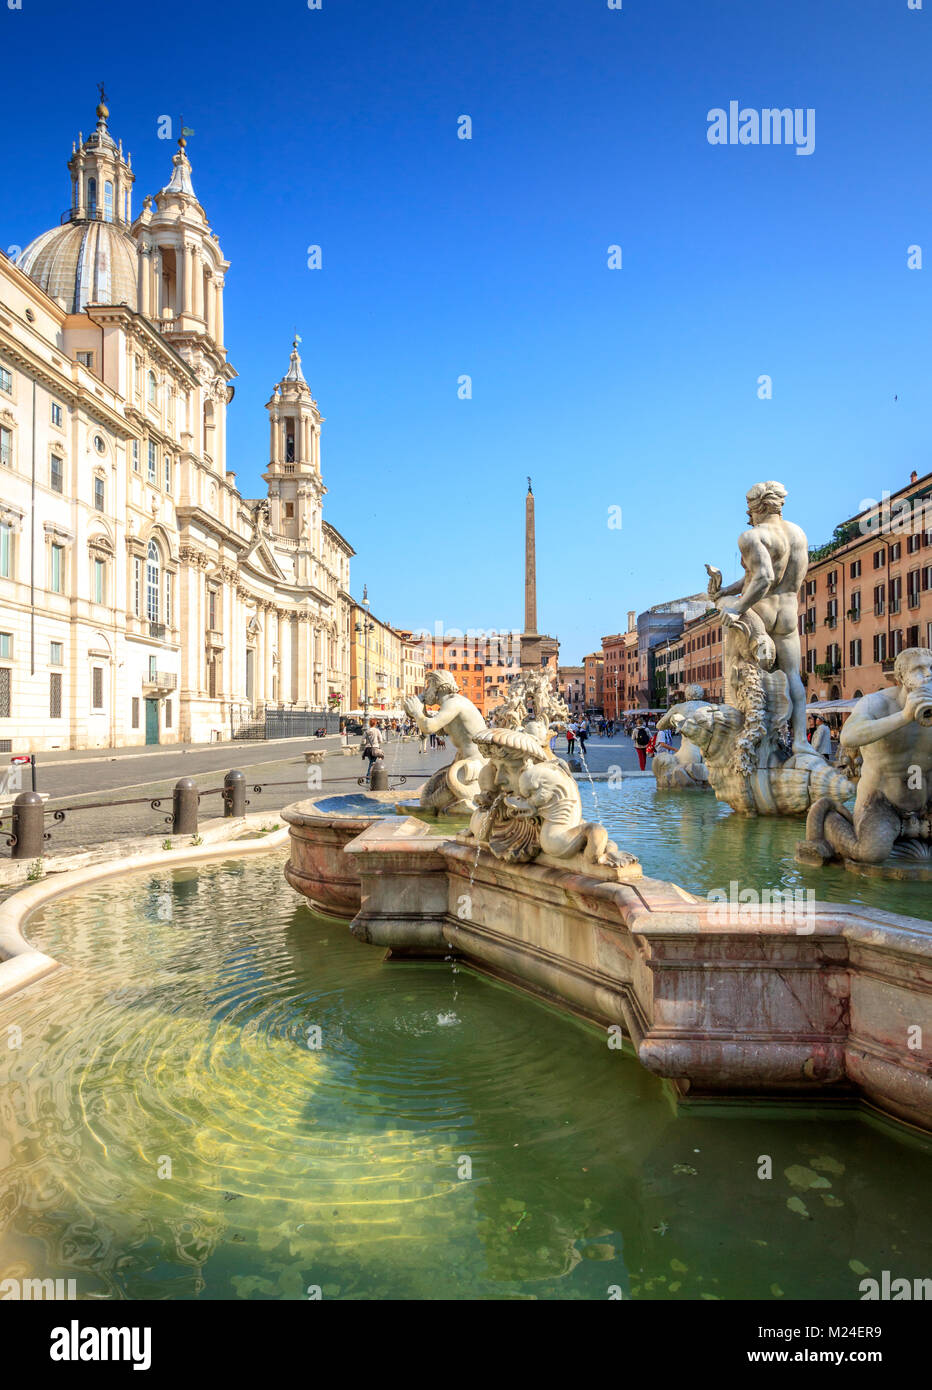 Piazza Navona and Moor fountain in the morning, Rome,Italy. Rome Piazza Navona is one of the main attractions of Rome and Italy Stock Photo